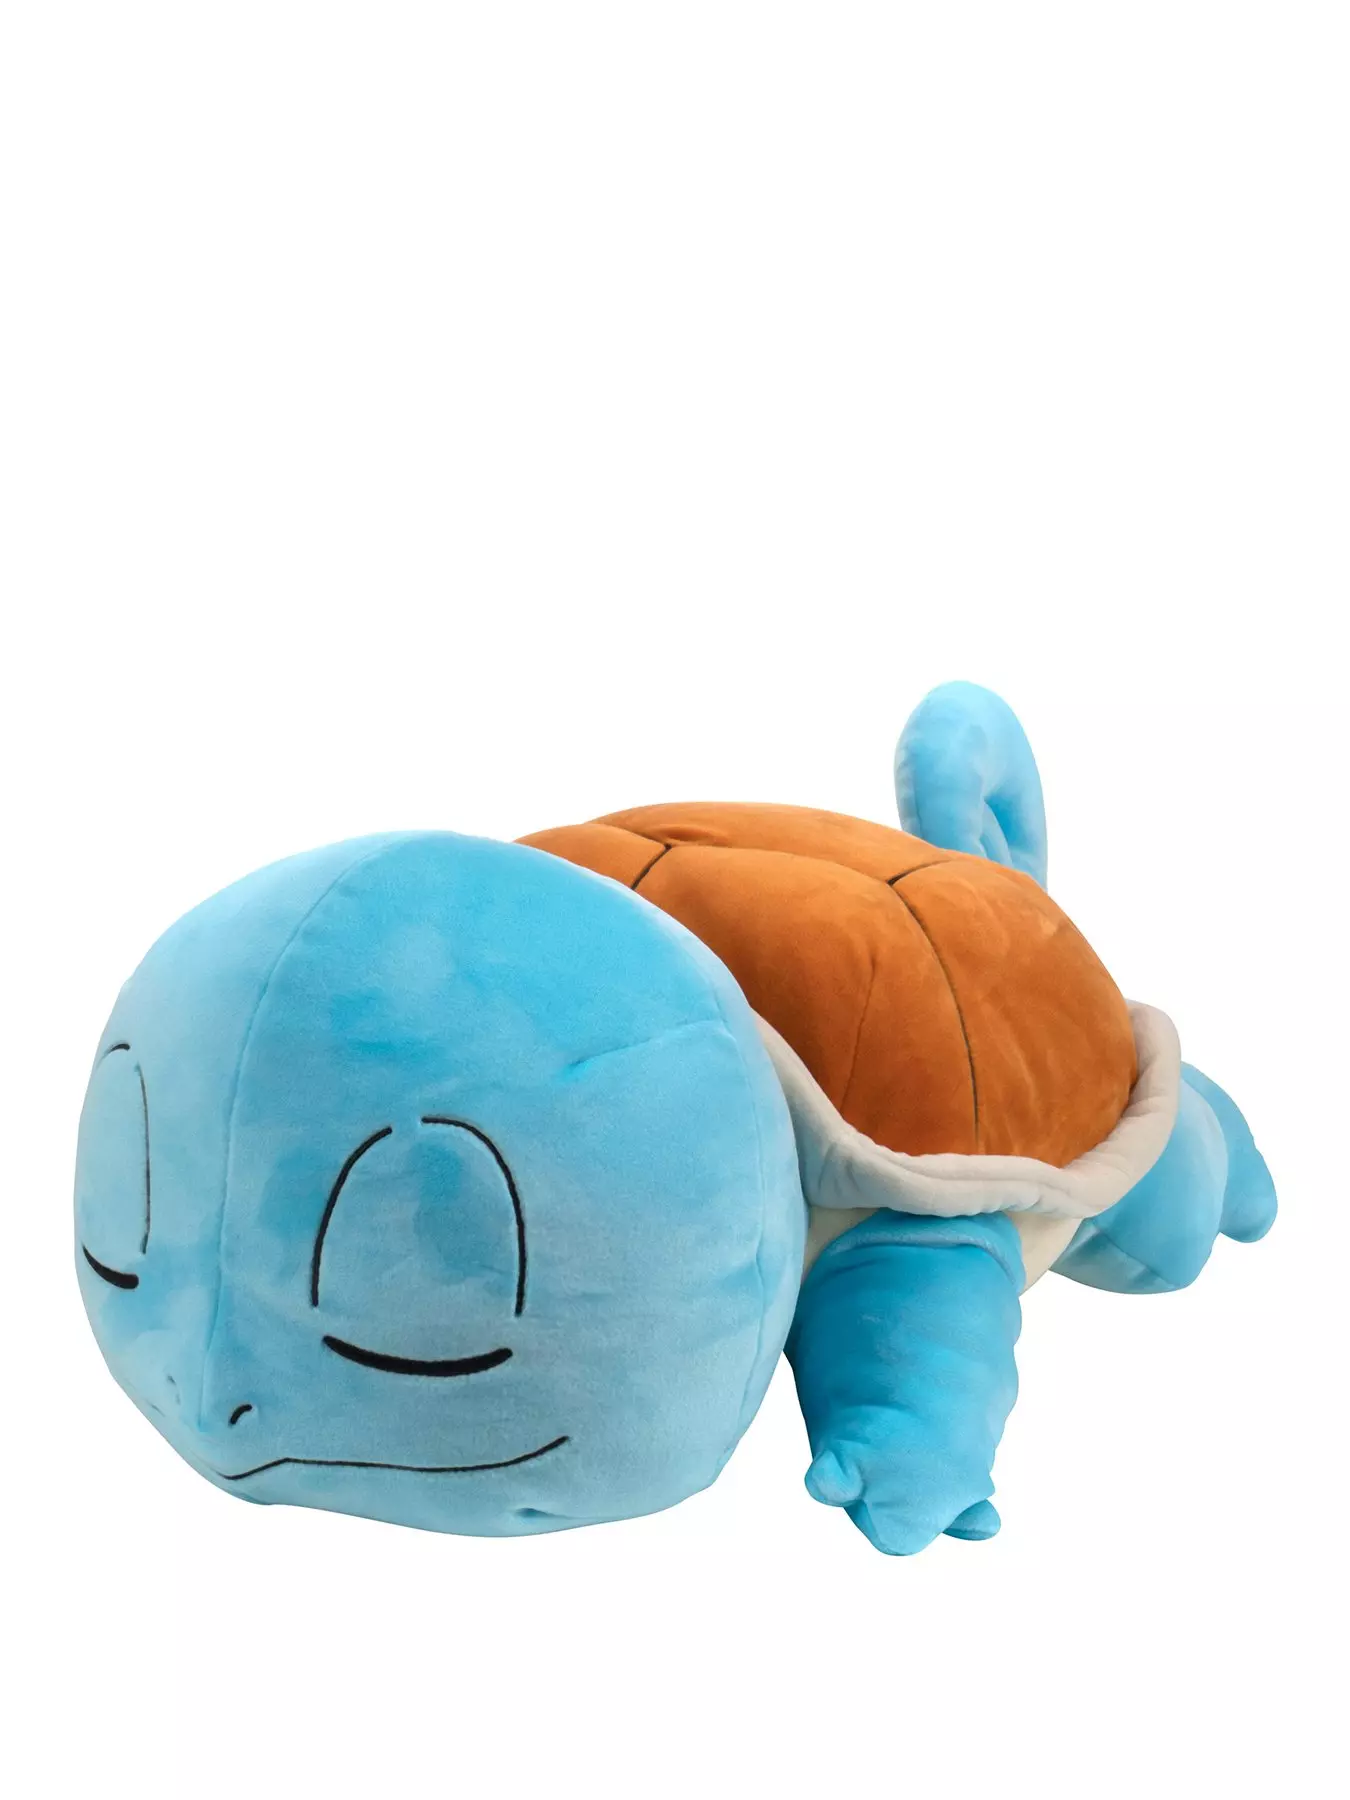 Squirtle Plush Pencil Case with 3 Pokemon Pencils and Erasers